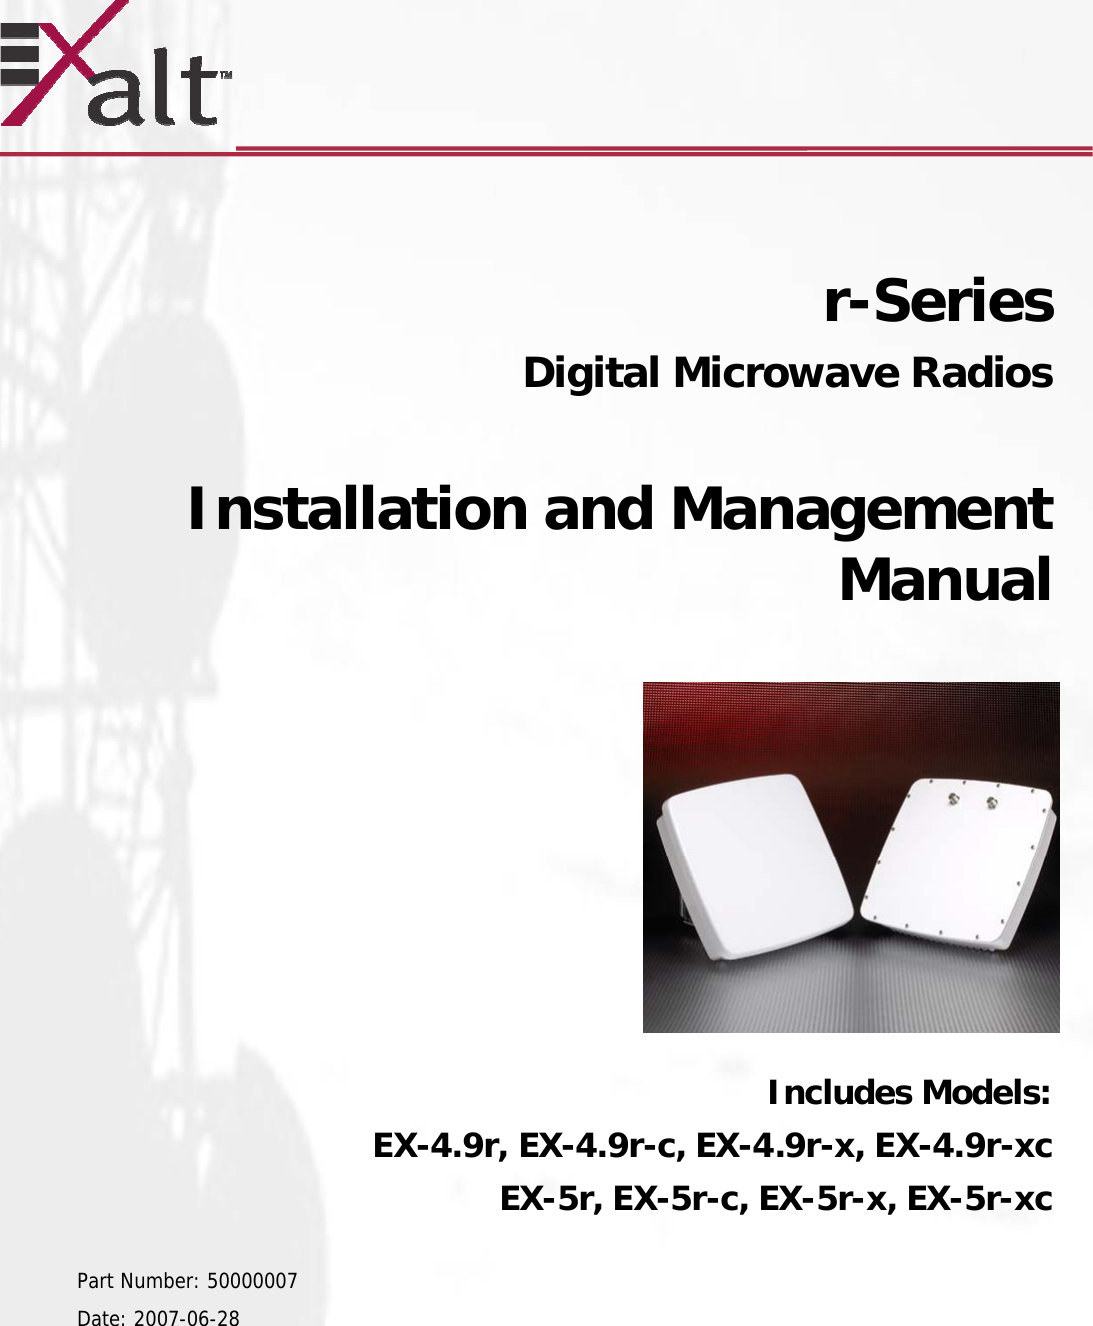       r-Series   Digital Microwave Radios   Installation and Management Manual            Includes Models: EX-4.9r, EX-4.9r-c, EX-4.9r-x, EX-4.9r-xc EX-5r, EX-5r-c, EX-5r-x, EX-5r-xc  Part Number: 50000007  Date: 2007-06-28  